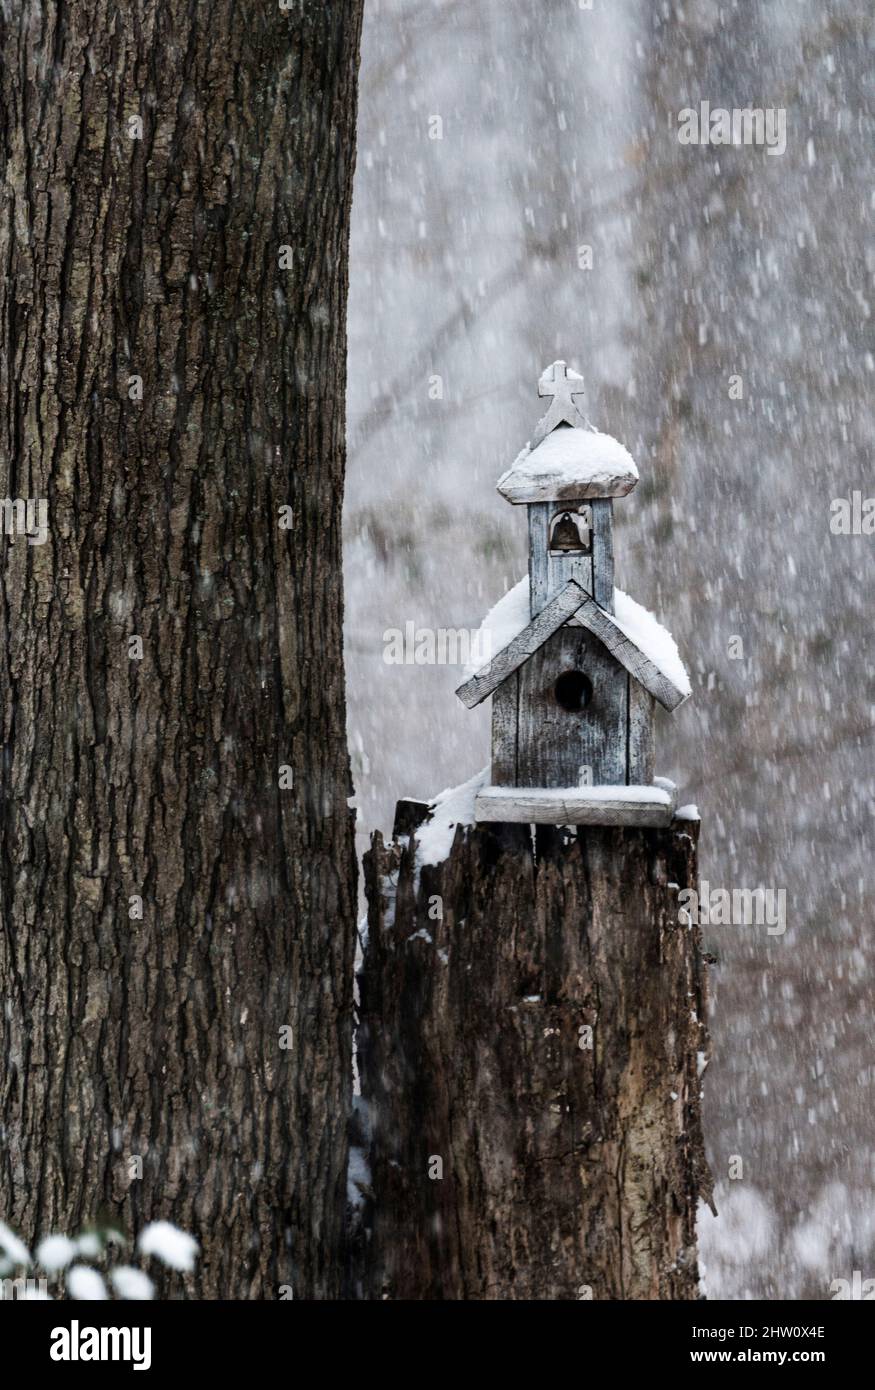 Charming birdhouse chapel in a winter snow storm. Stock Photo